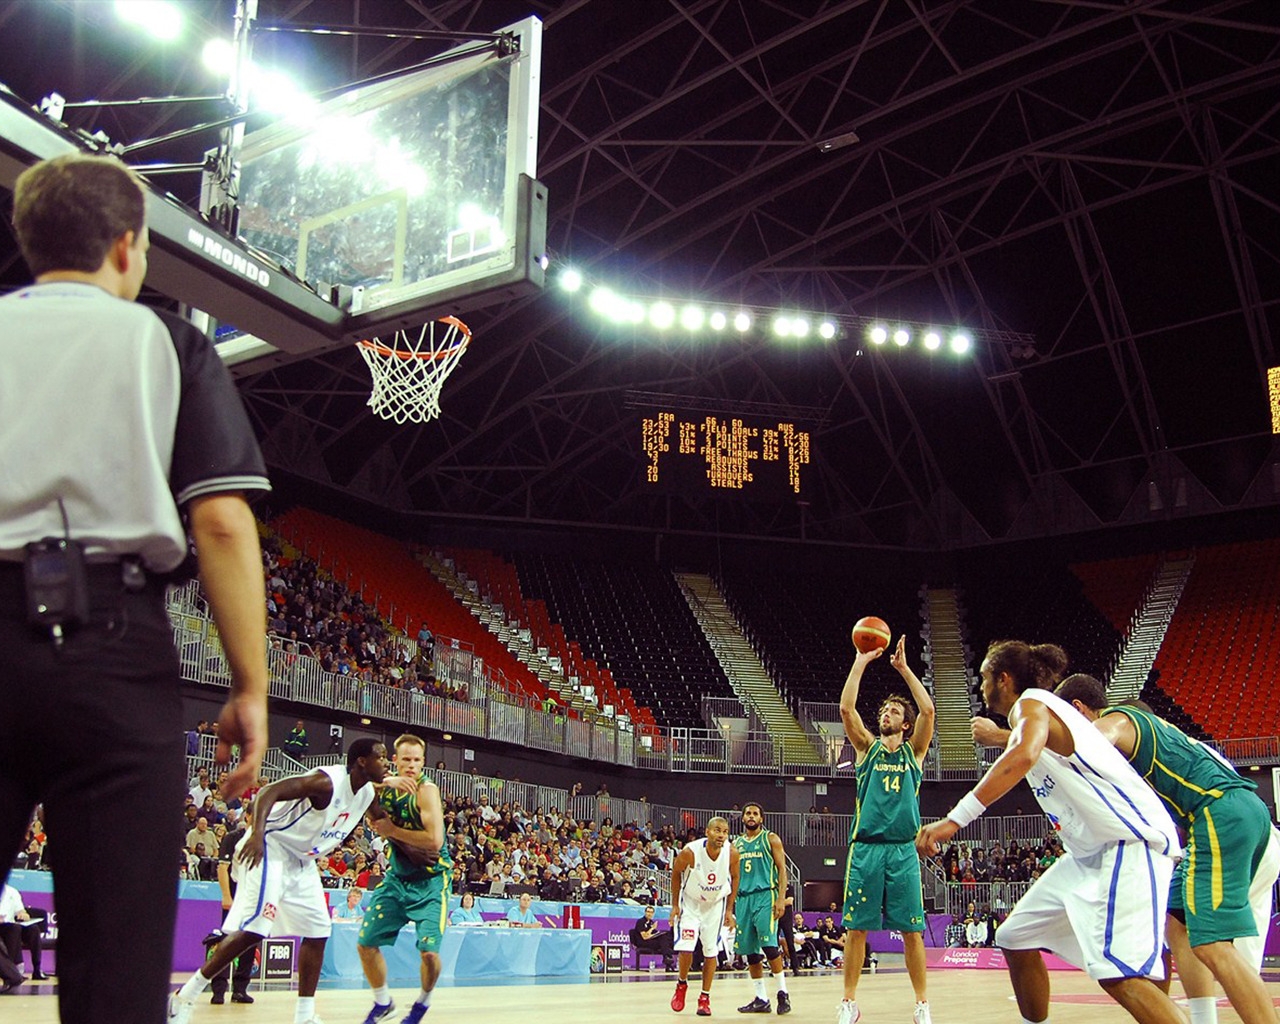 Basketball on the Olympic Park for 1280 x 1024 resolution